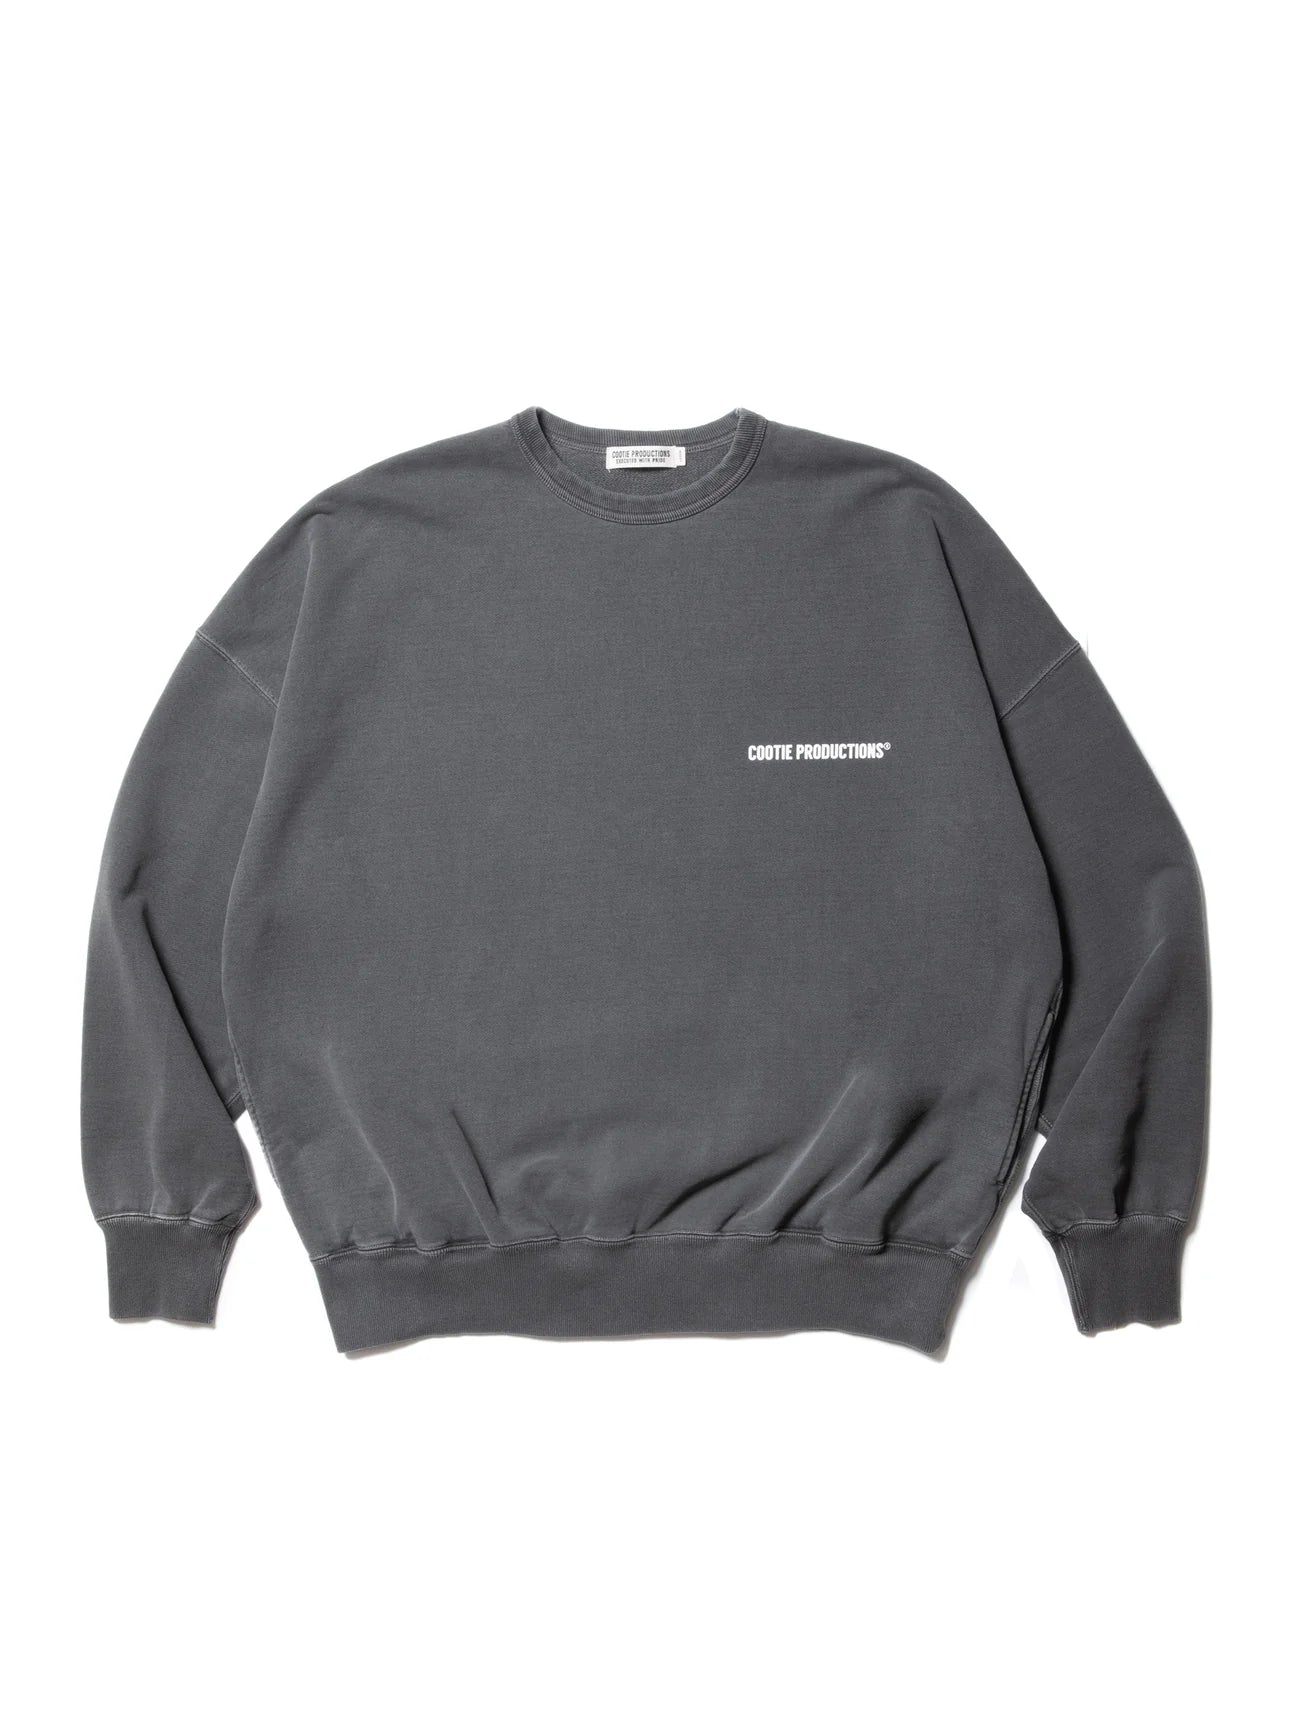 COOTIE PRODUCTIONS PIGMENT DYED L/S TEE-